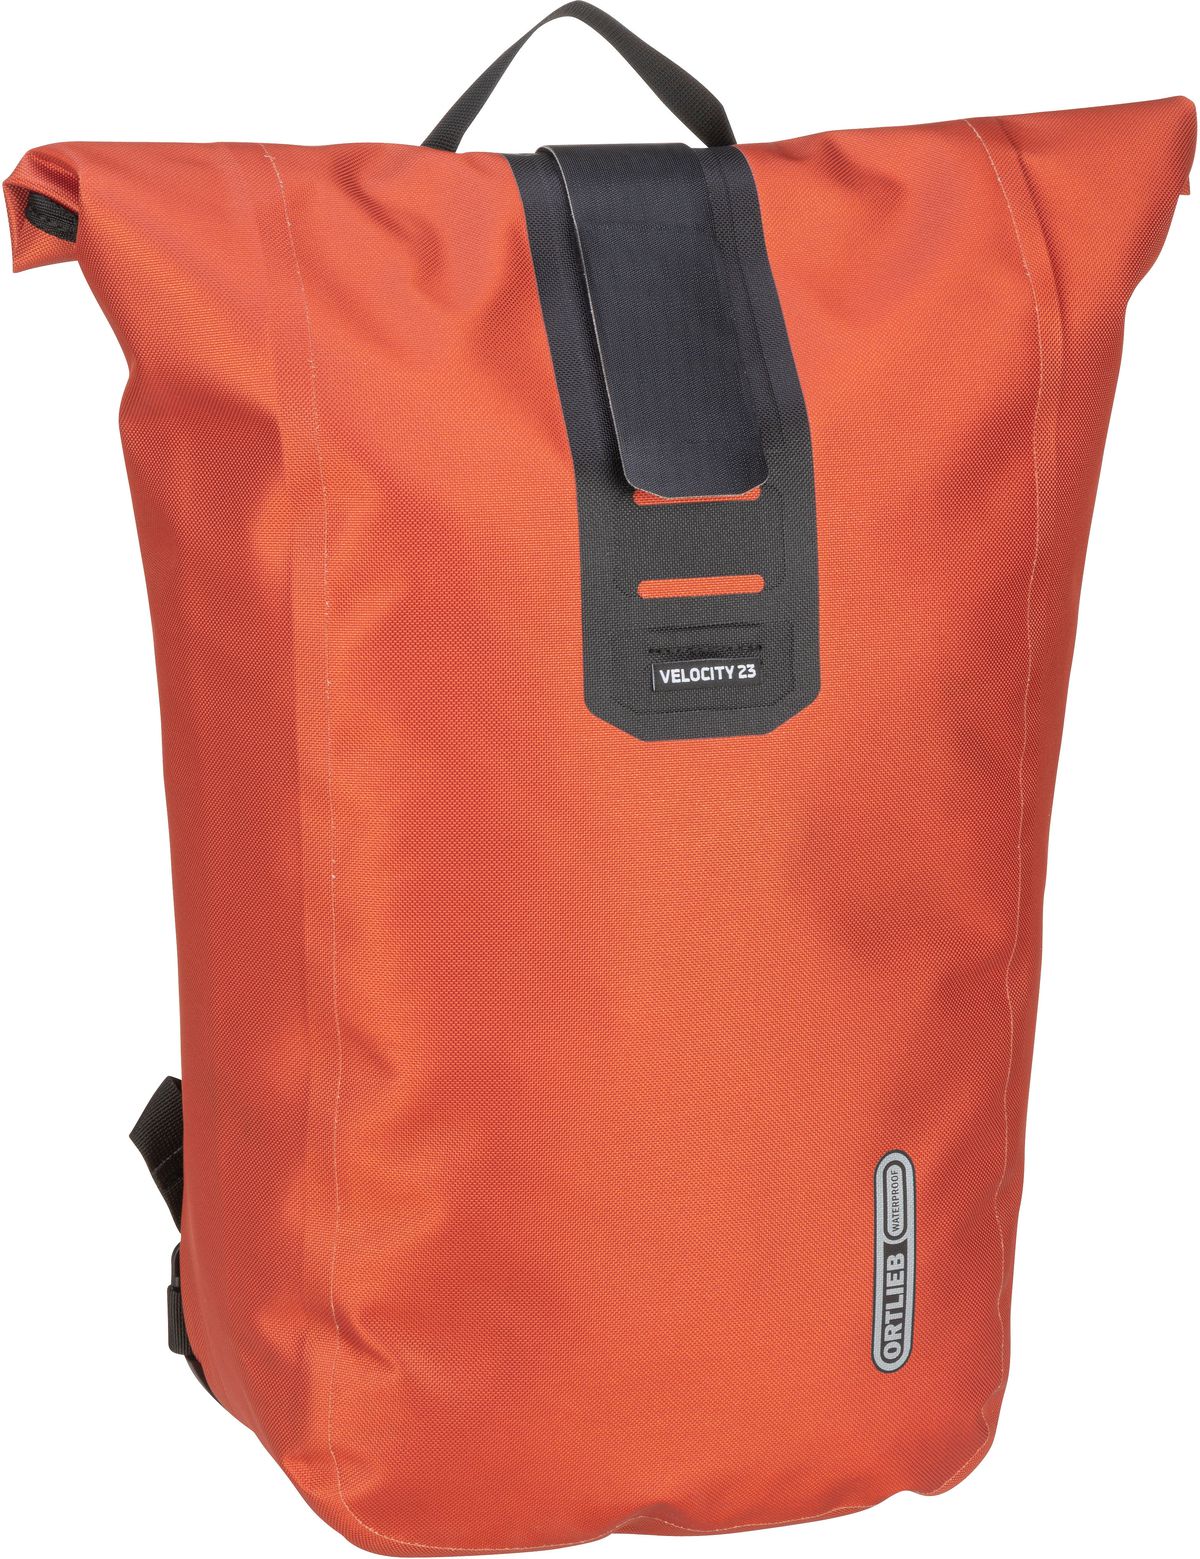 Ortlieb ORTLIEB Velocity PS 23L in Rot (23 Liter), Rucksack / Backpack